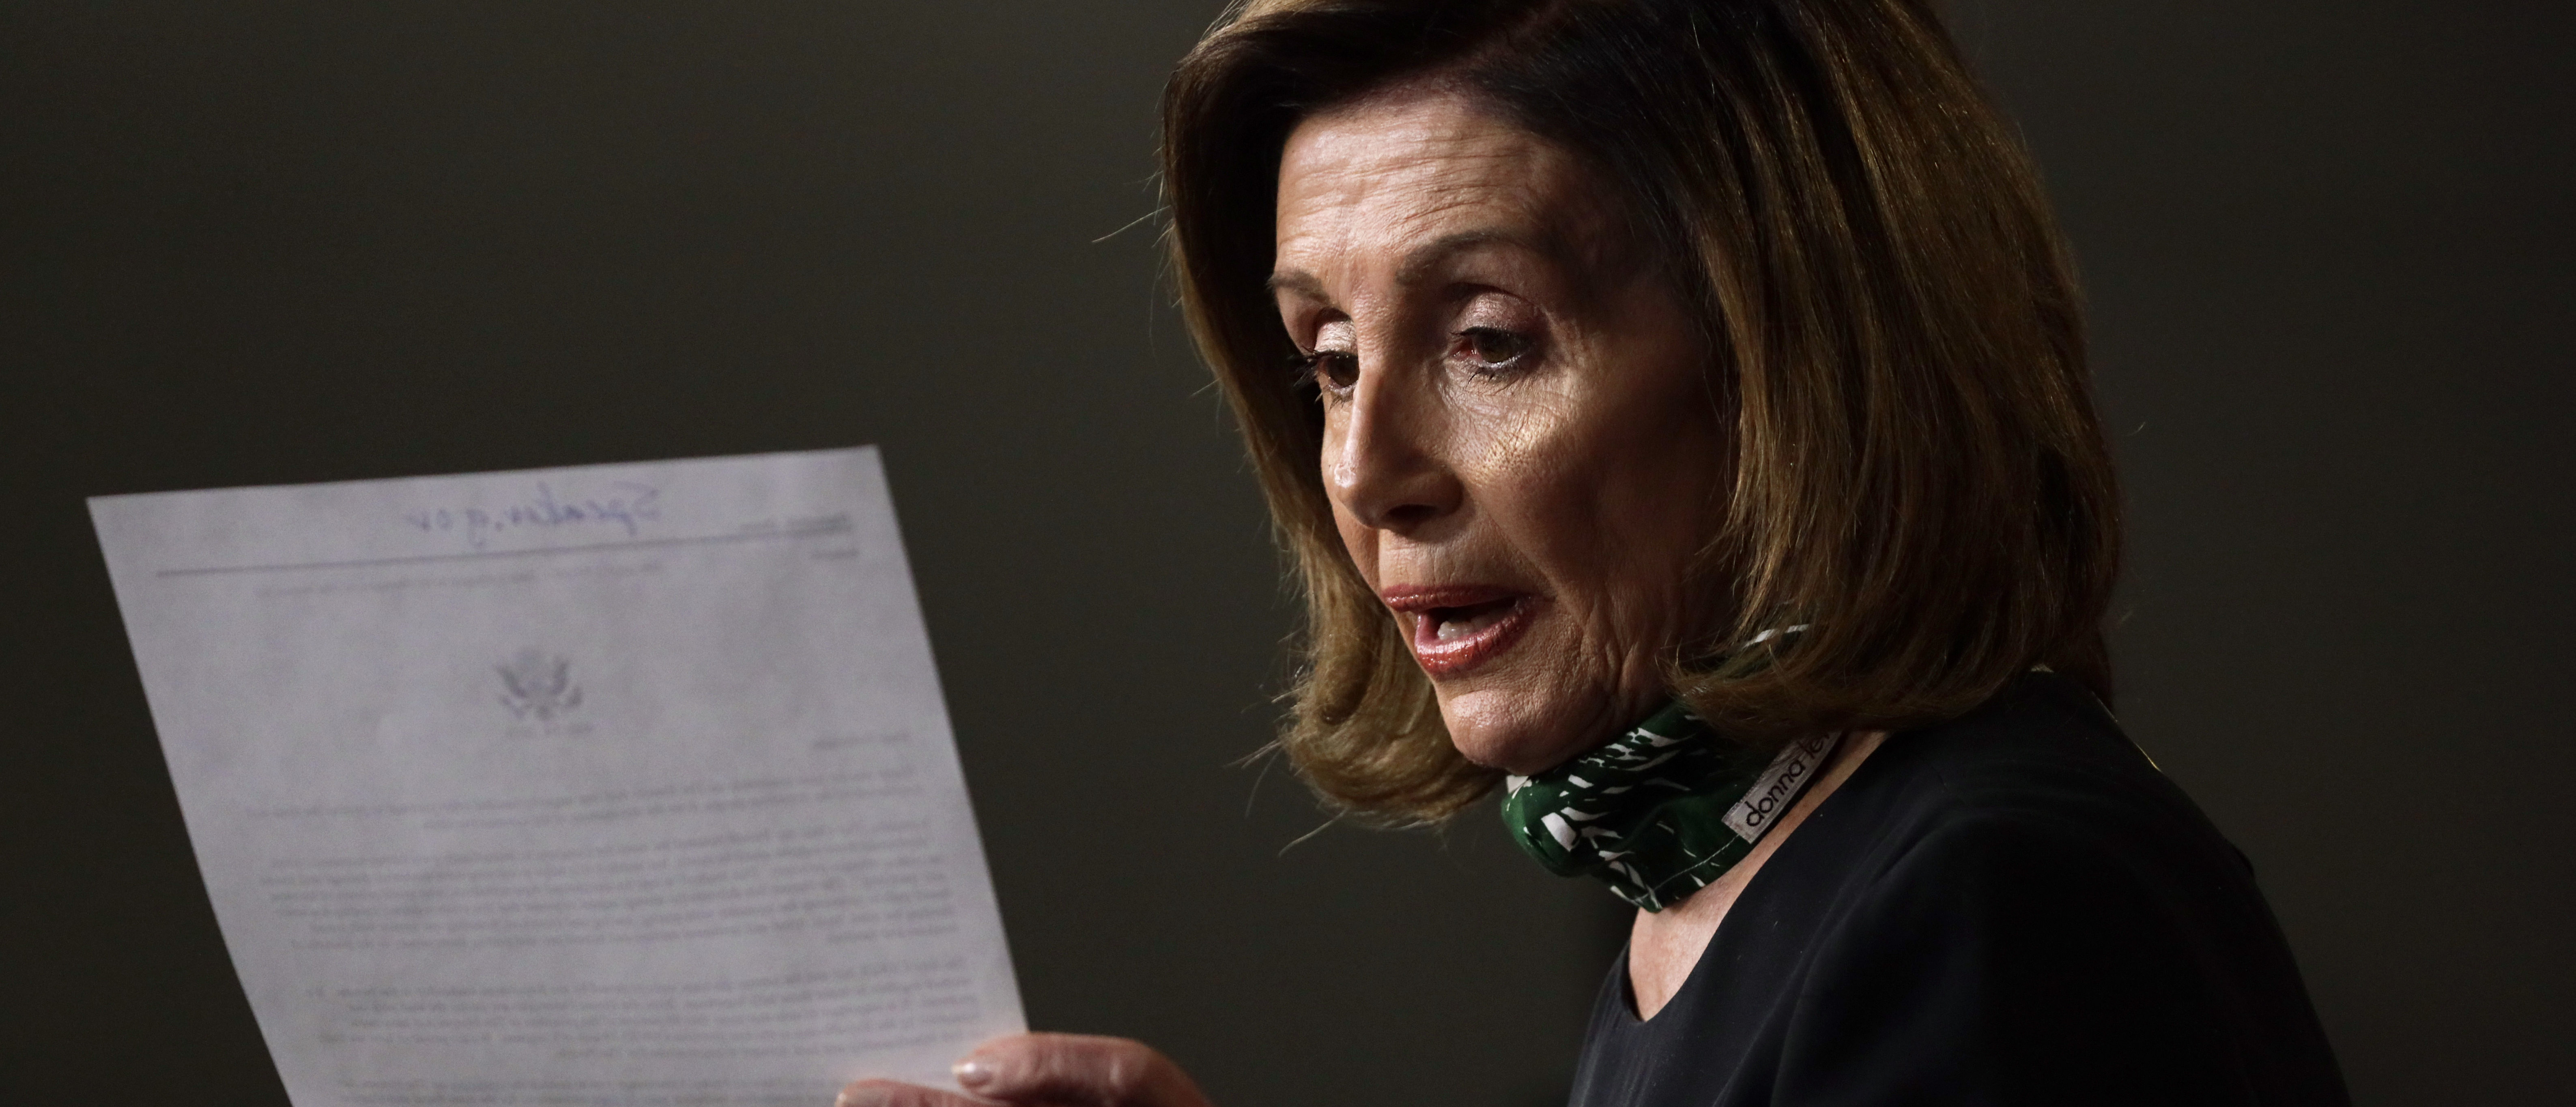 WASHINGTON, DC - MAY 14: U.S. Speaker of the House Rep. Nancy Pelosi (D-CA) reads from a note during a weekly news conference at the U.S. Capitol May 14, 2020 in Washington, DC. Speaker Pelosi held a weekly news conference to fill questions from members of the press. (Photo by Alex Wong/Getty Images)